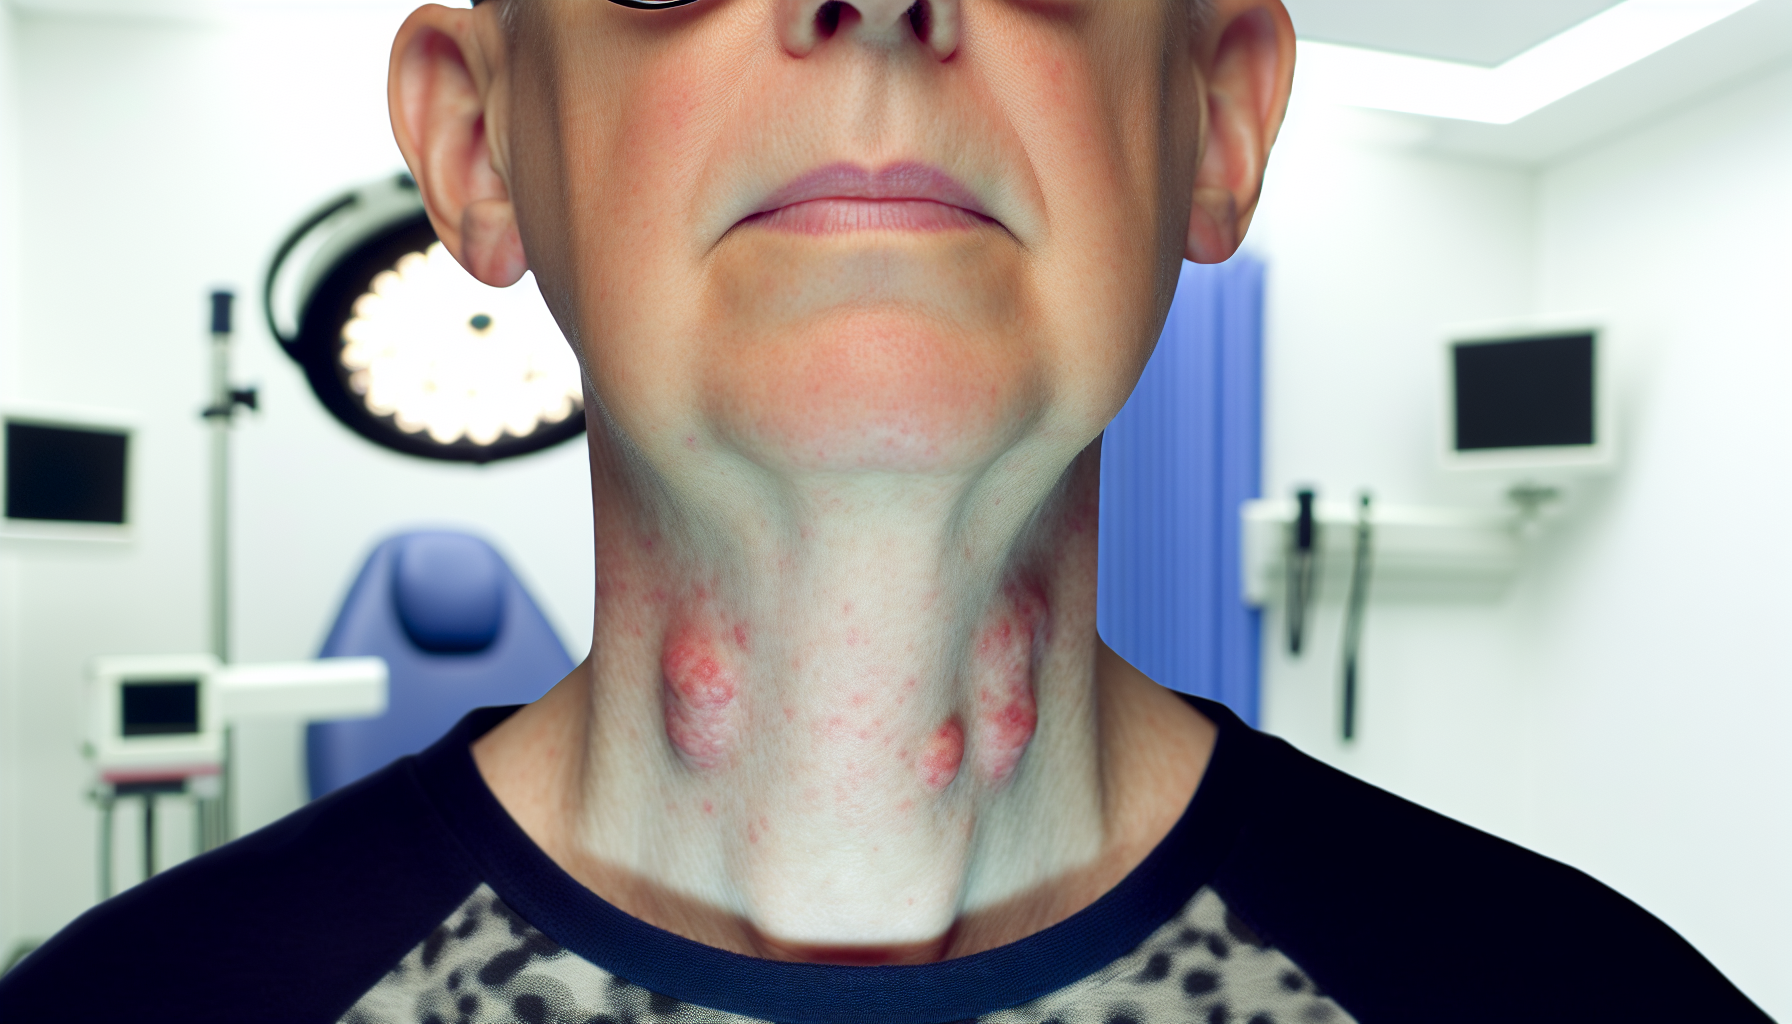 Photo of a person with swollen lymph nodes